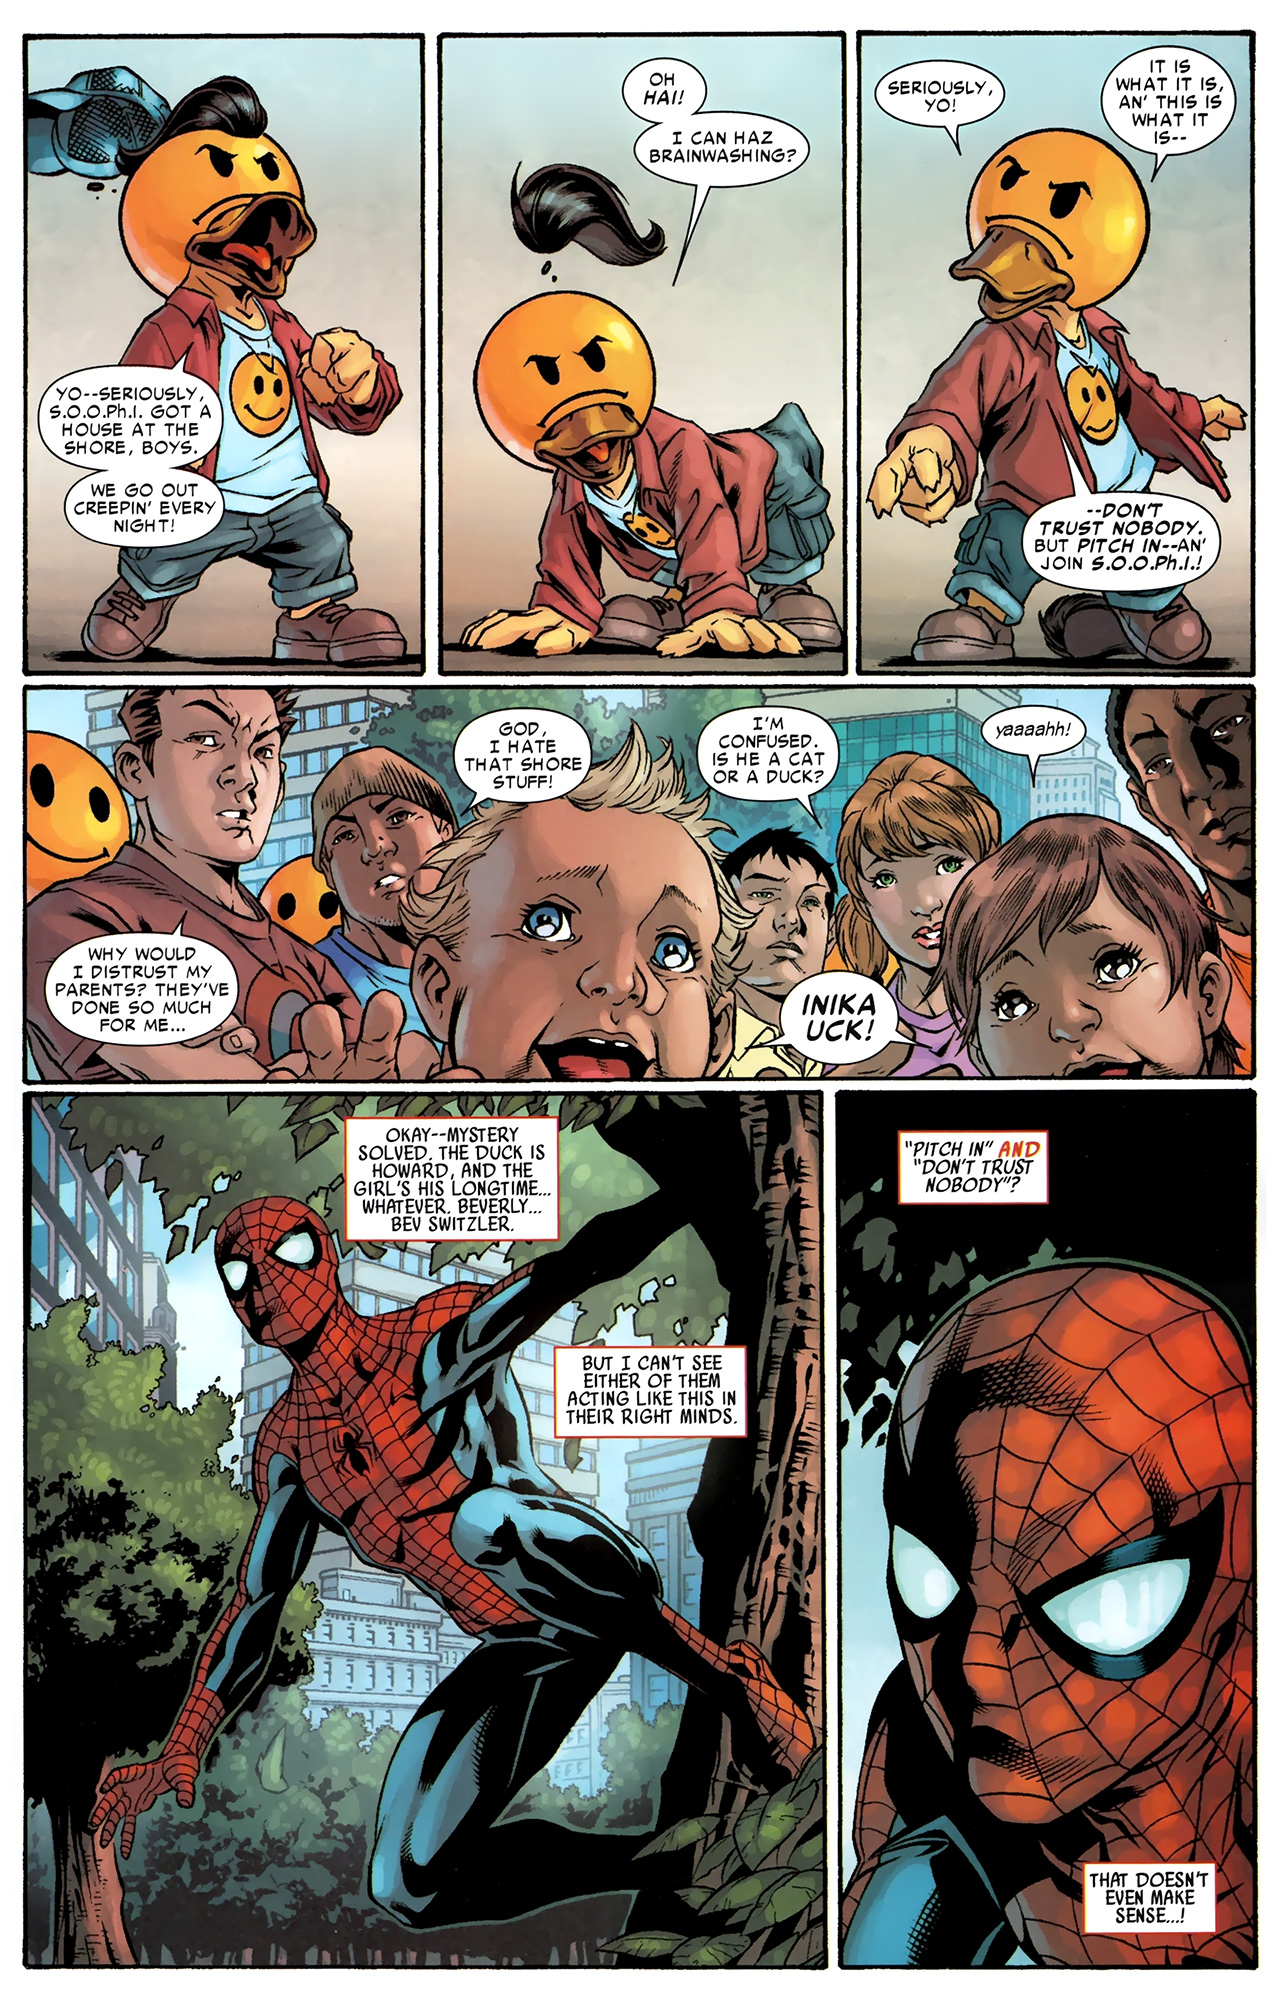 Read online The Amazing Spider-Man: Back in Quack comic -  Issue # Full - 7